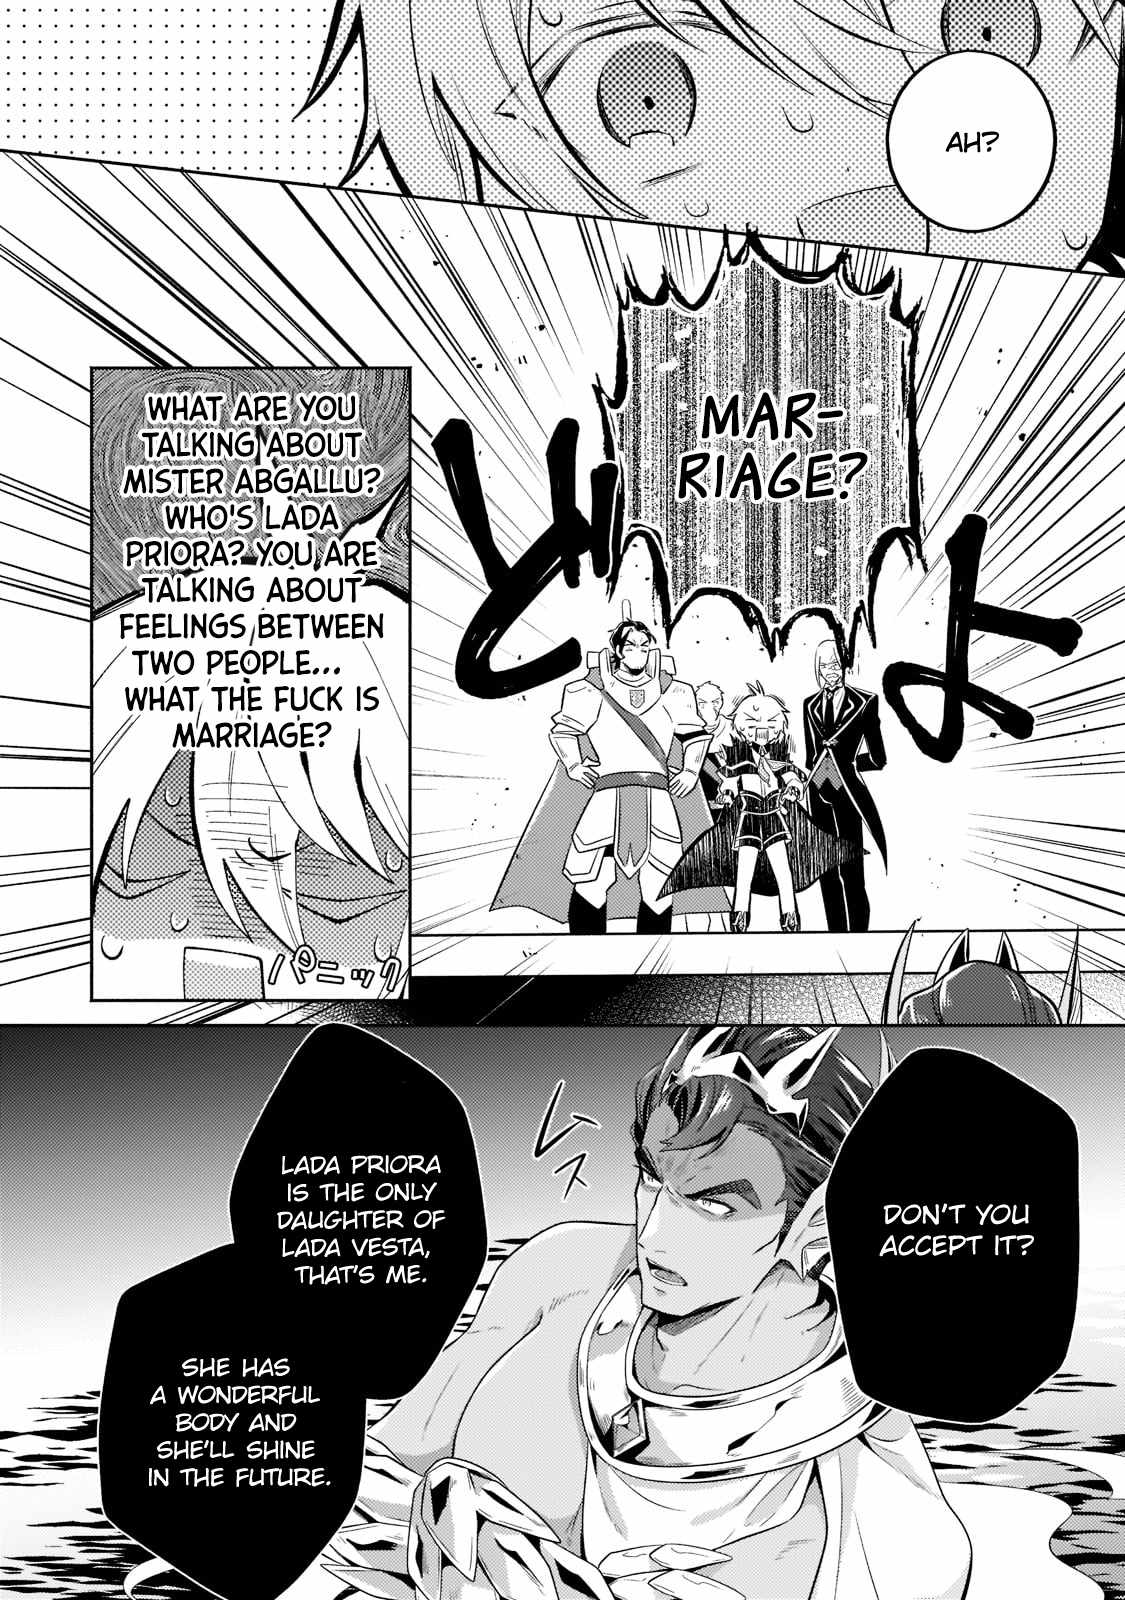 Fun Territory Defense by the Optimistic Lord Chapter 15-2-eng-li - Page 7